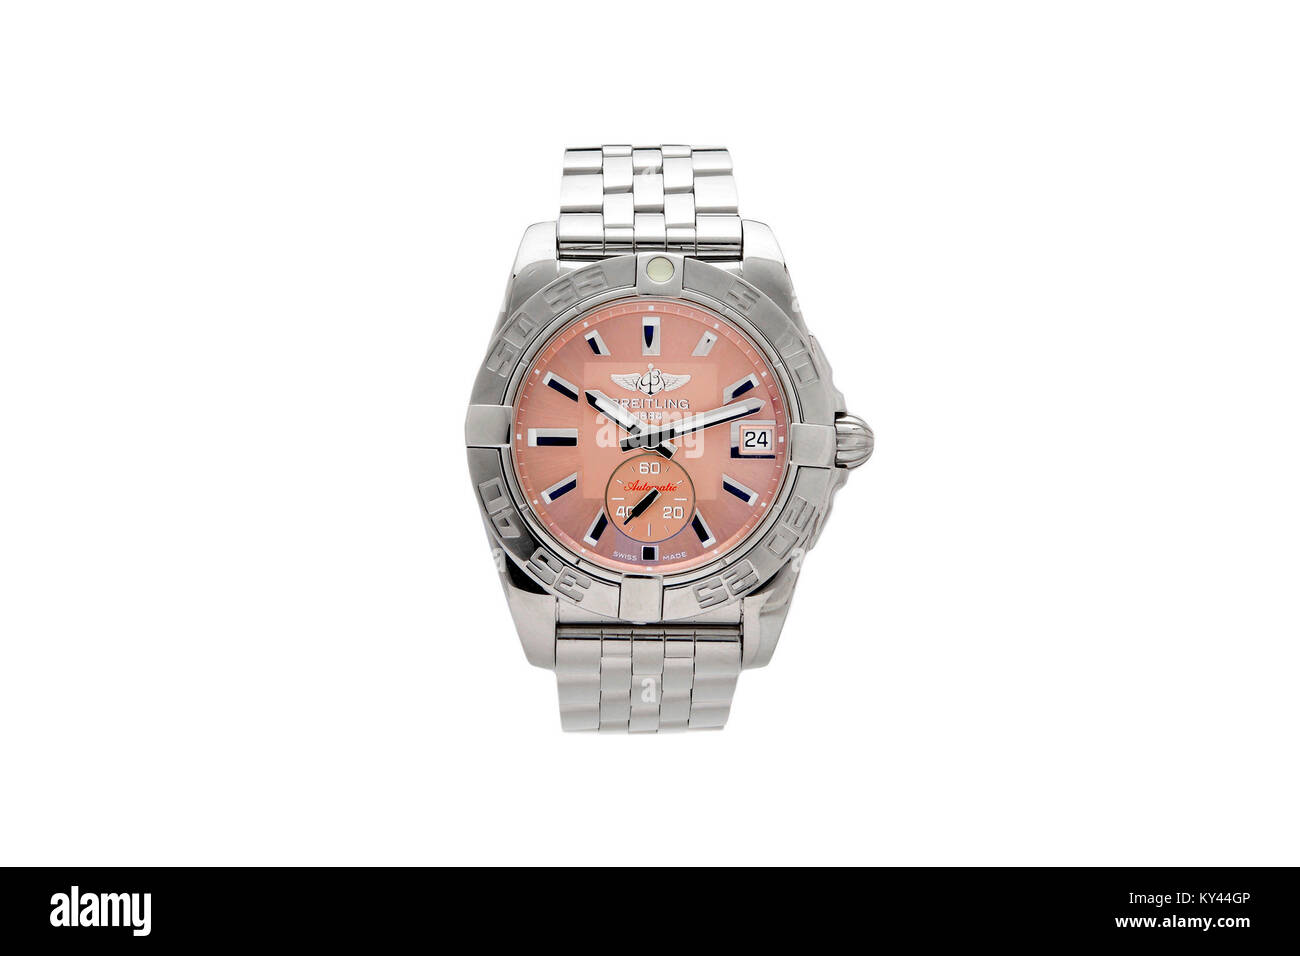 Breitling stainless steel man's watch with pink face Stock Photo